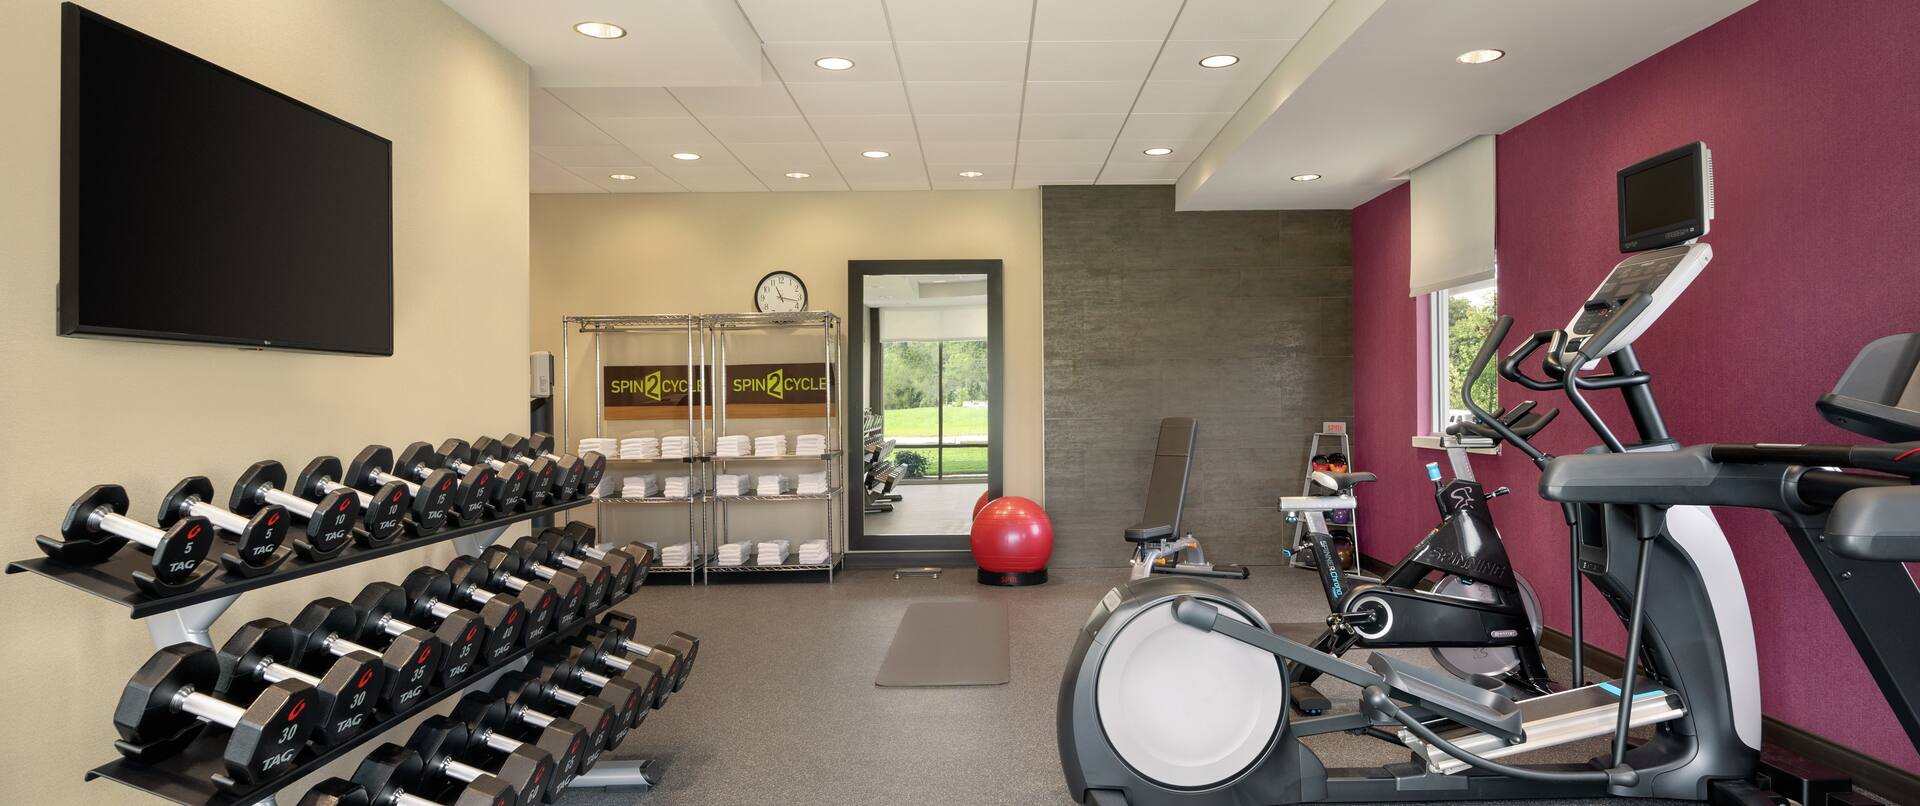 Bright fitness center featuring free weights, cardio machines, and TV.